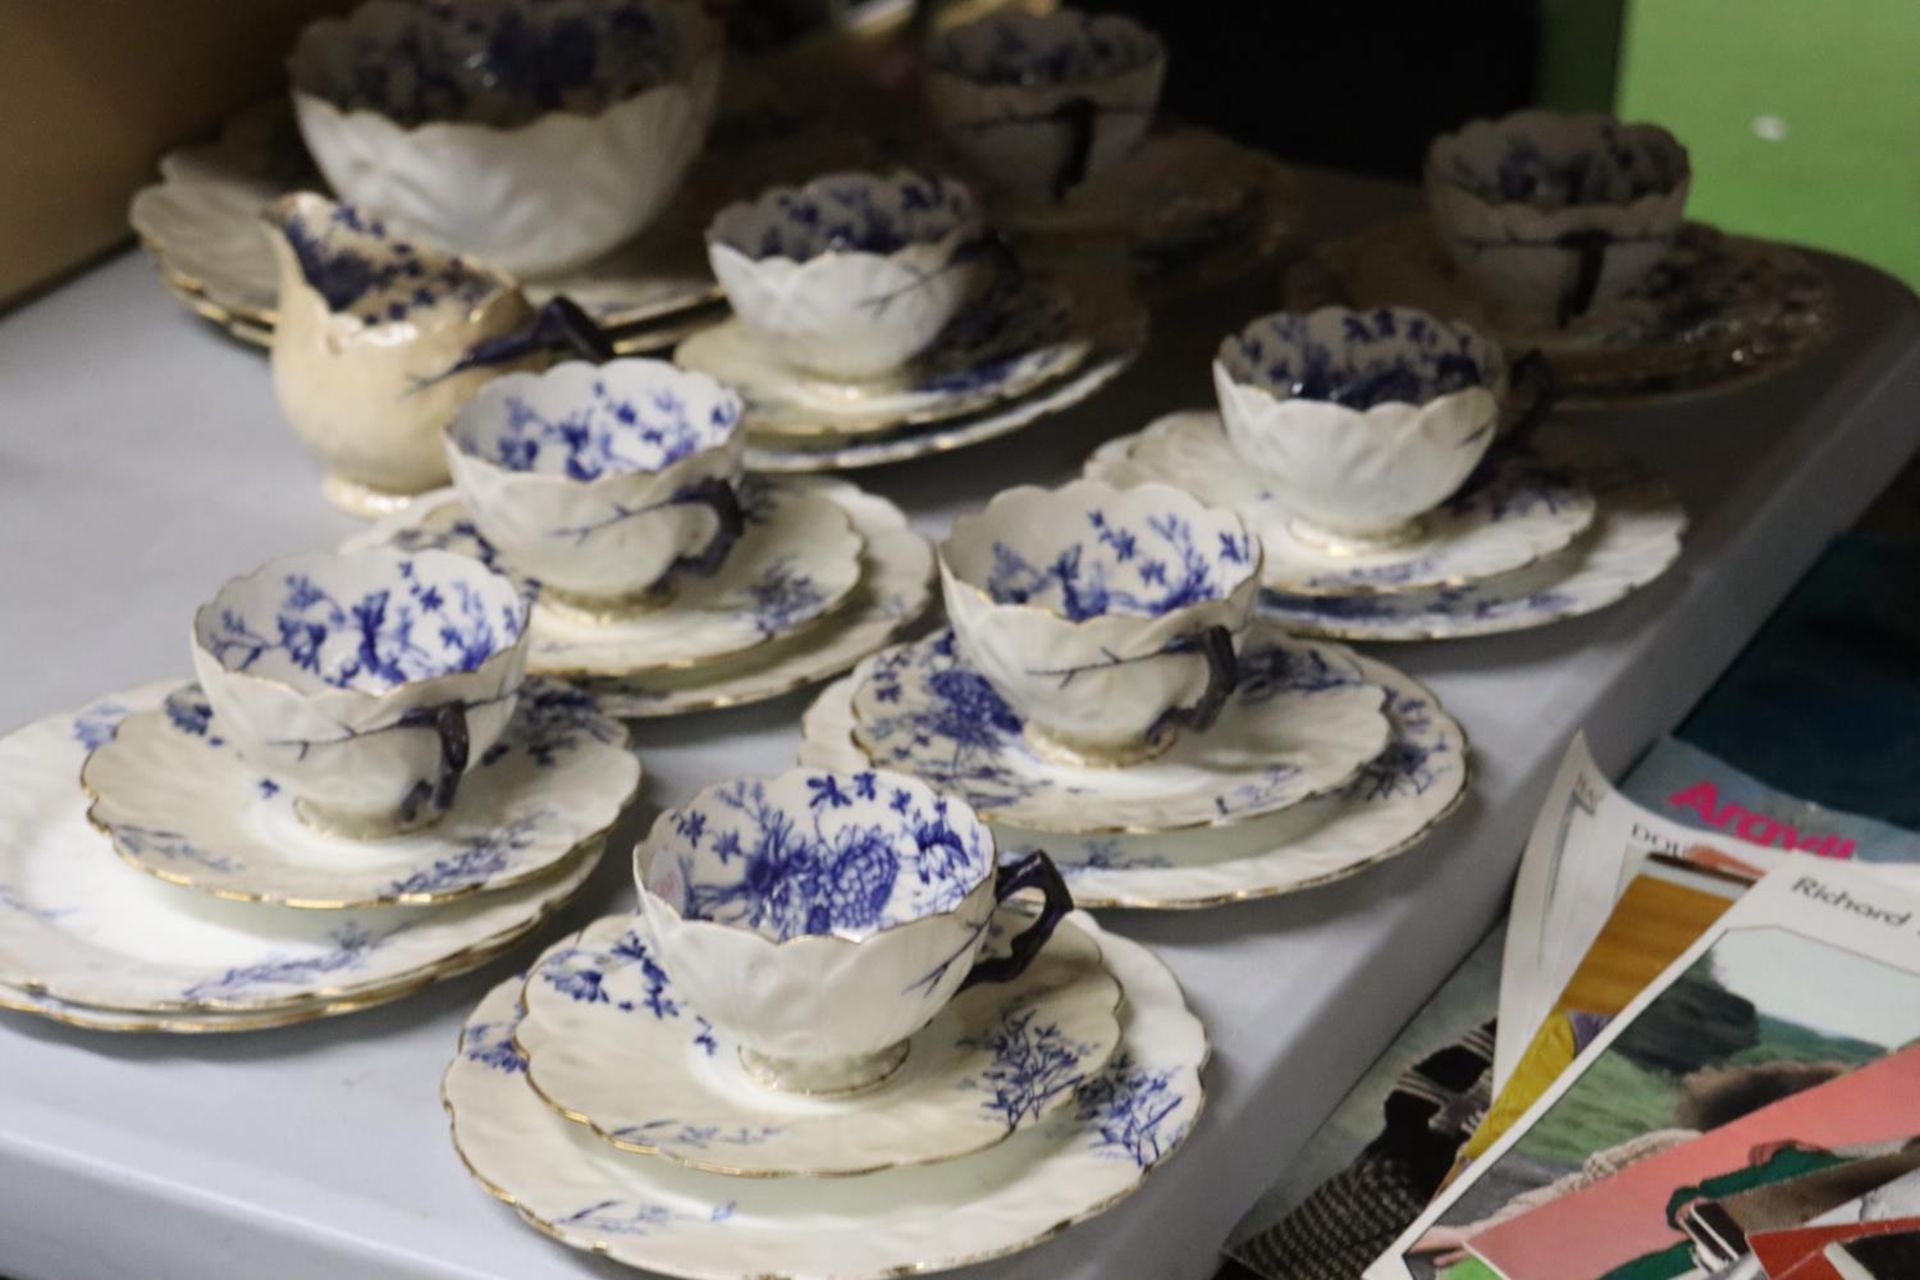 A VINTAGE CHINA TEASET SET, WITH BLUE AND WHITE PATTERN AND FLUTED EDGES, TO INCLUDE CAKE PLATES, - Image 5 of 5